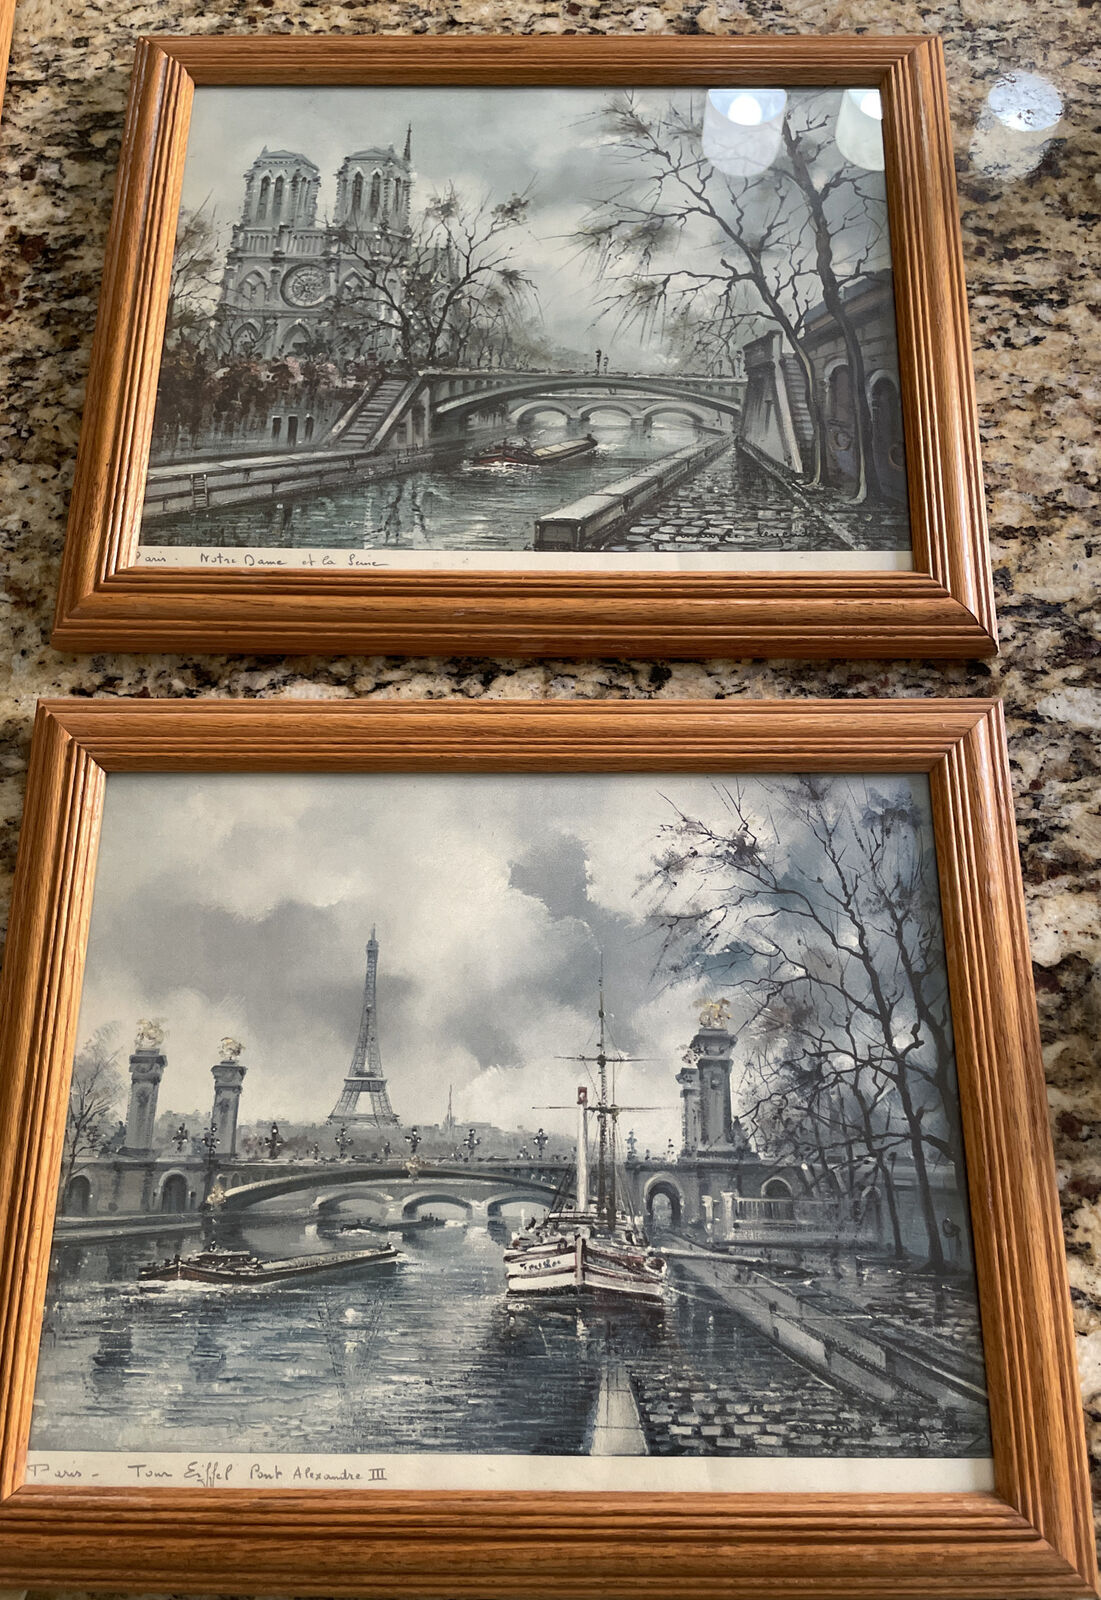 Two Original Framed Lithogr Frech Scenes signed by Maurice Legendre 16.5”x 13.5